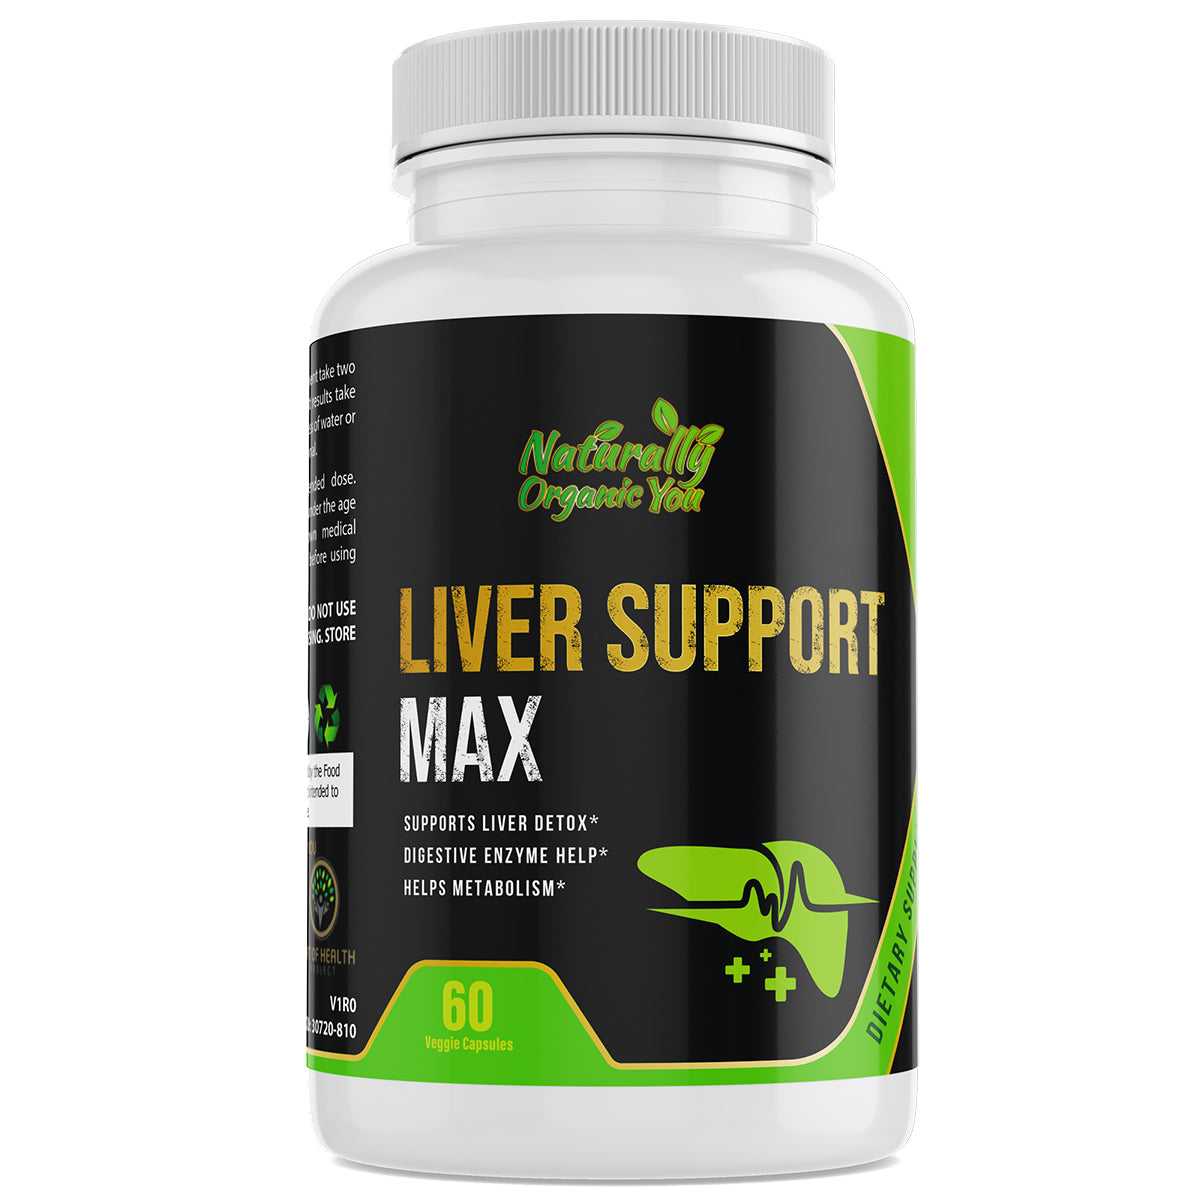 LIVER SUPPORT MAX